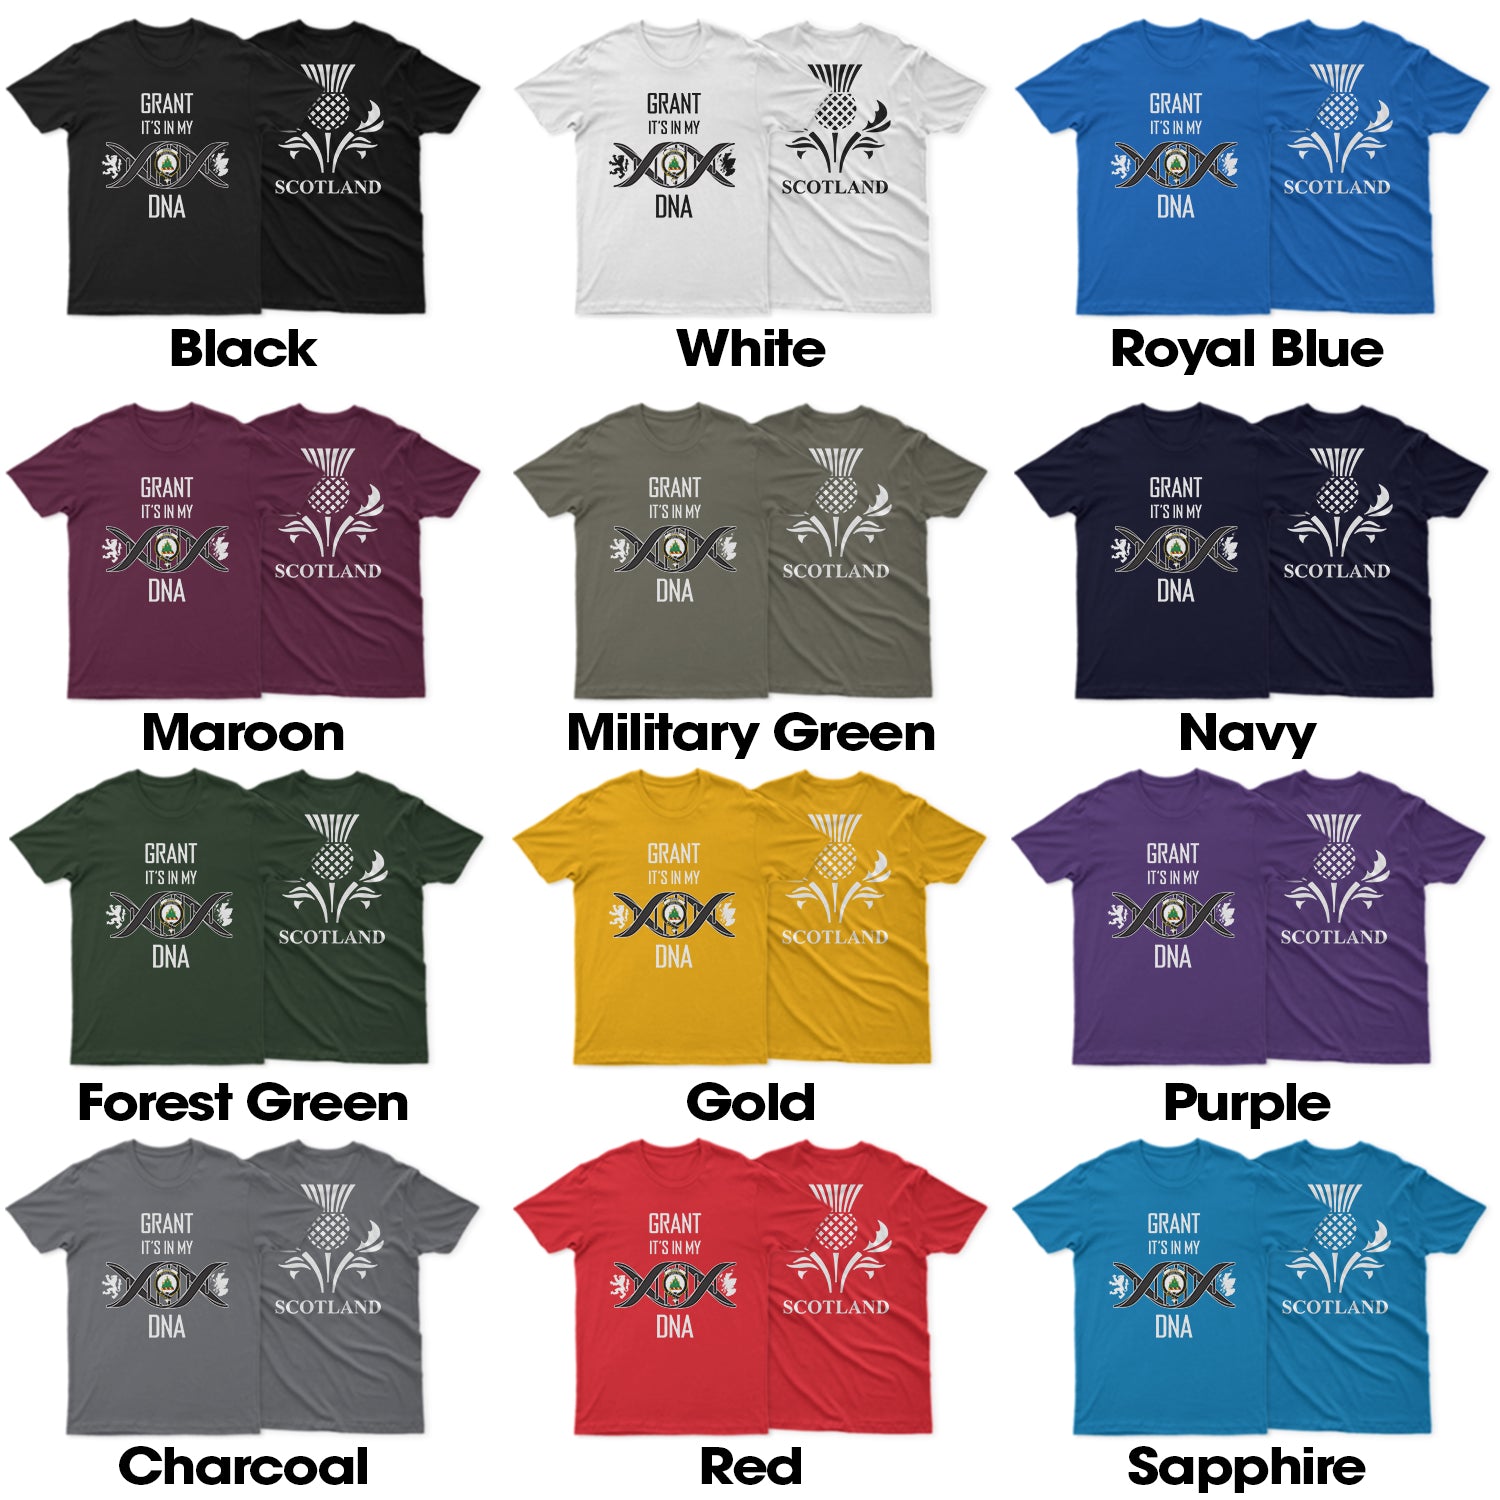 grant-family-crest-dna-in-me-mens-t-shirt